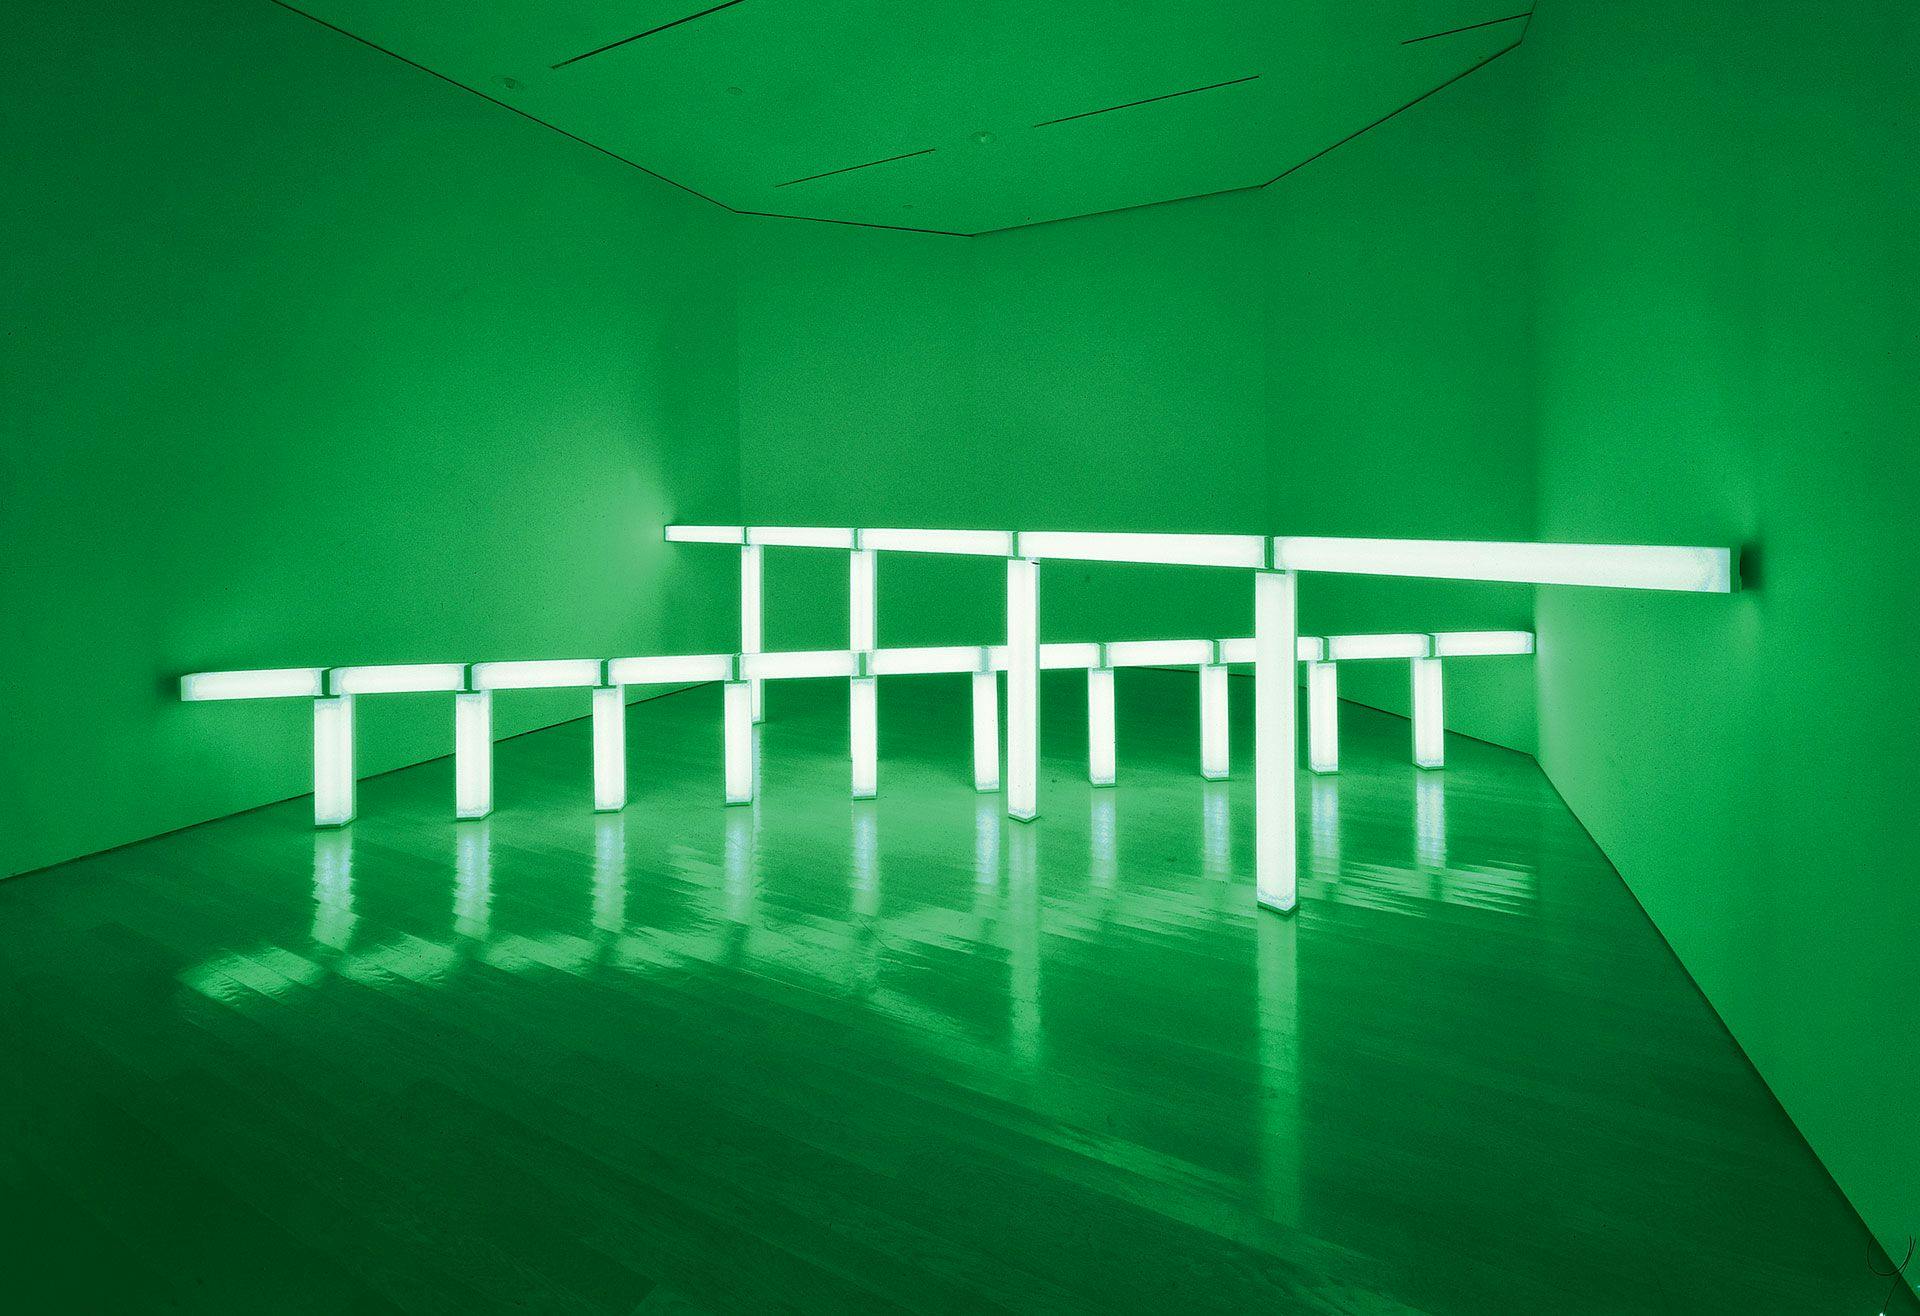 A sculpture in green fluorescent light by Dan Flavin, titled greens crossing greens (to Piet Mondrian who lacked green), dated 1966.